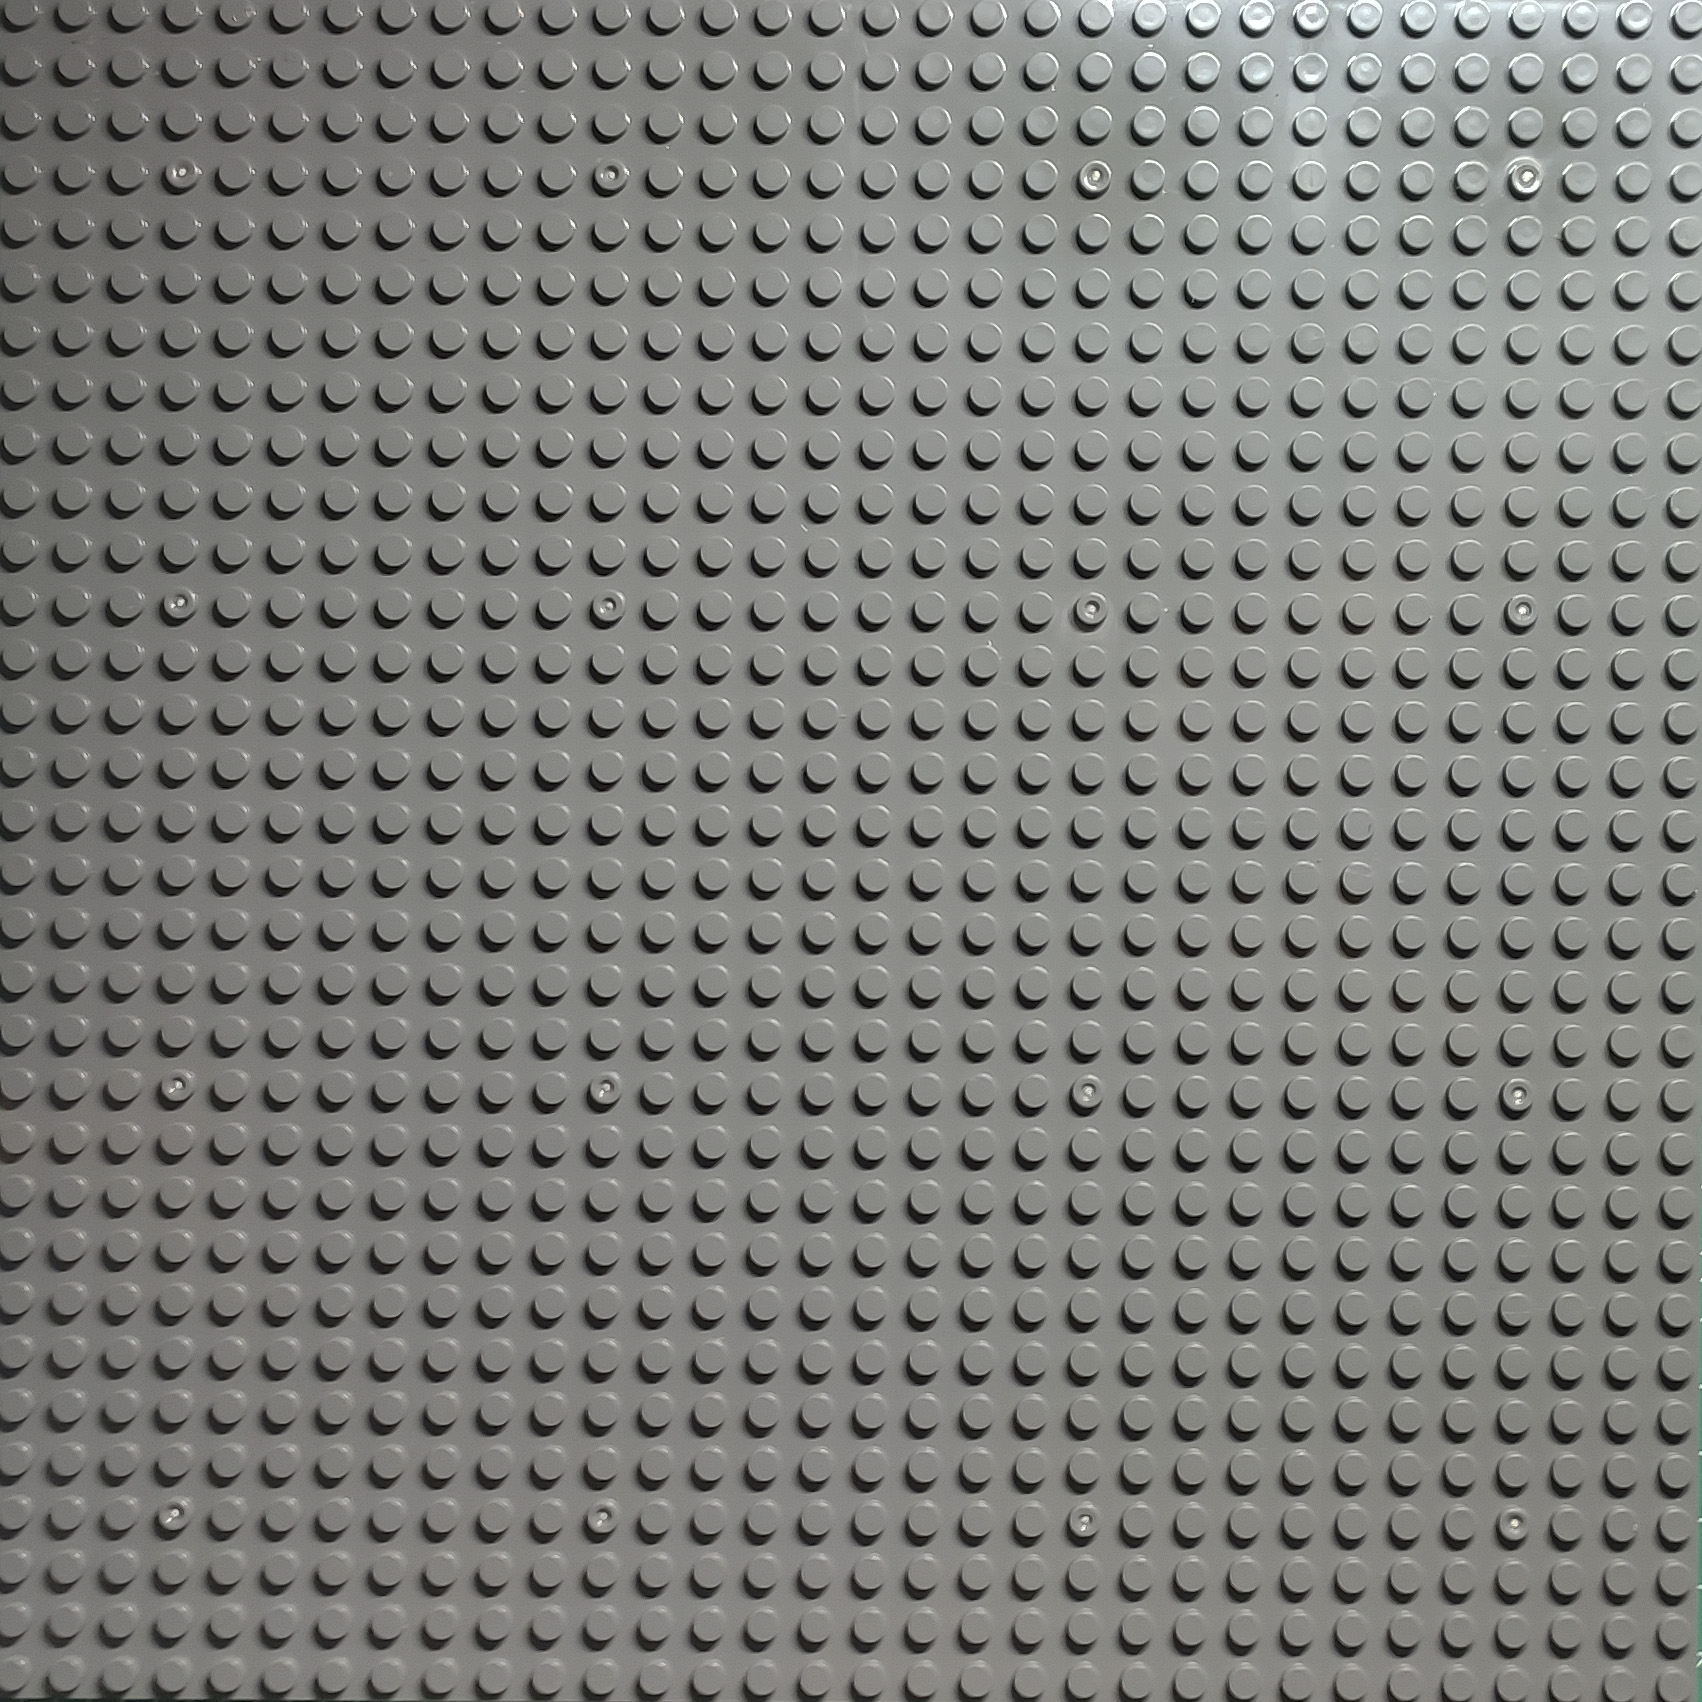 Classic Baseplates, 10"x10" Dark Grey Compatible with LEGO